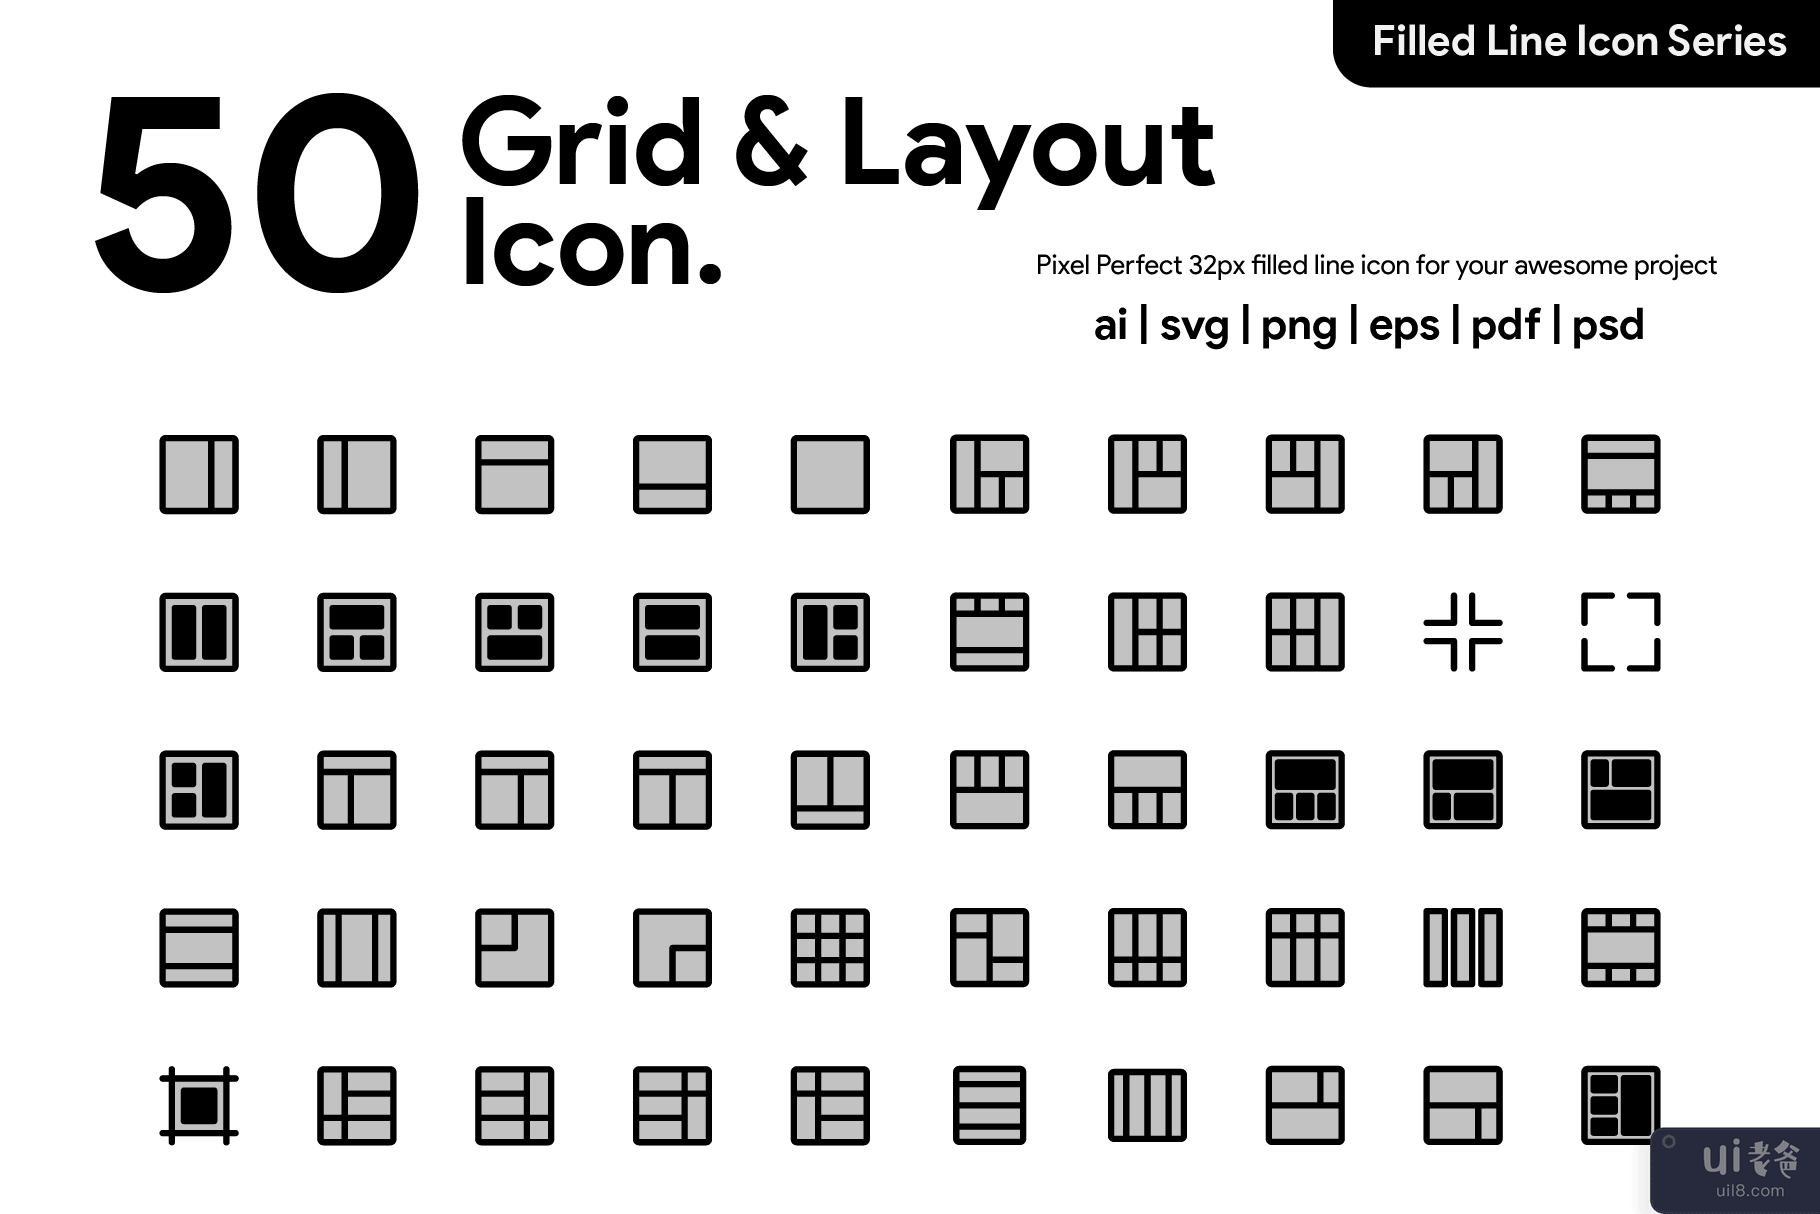 50 Grid & Layout Filled Line 图标(50 Grid & Layout Filled Line Icon)插图5